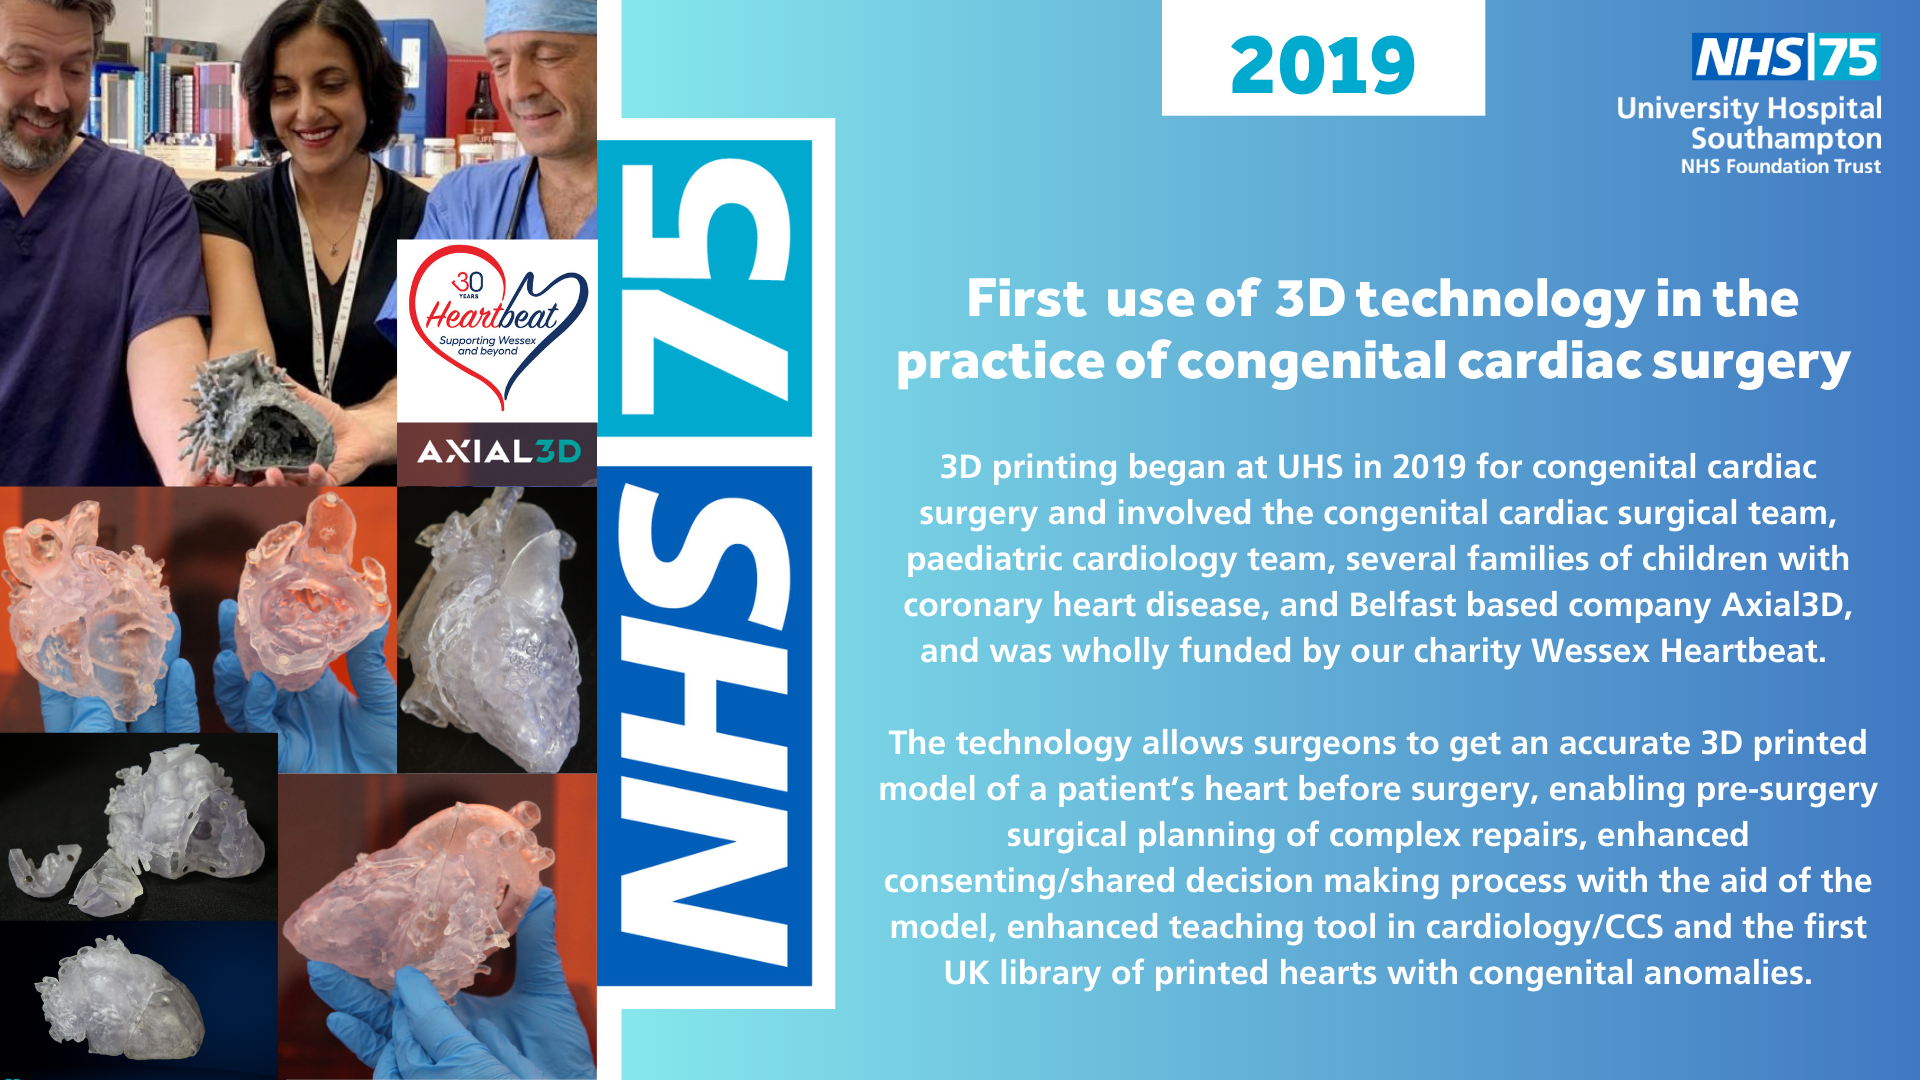 First use of 3D technology in the practice of congenital cardiac surgery